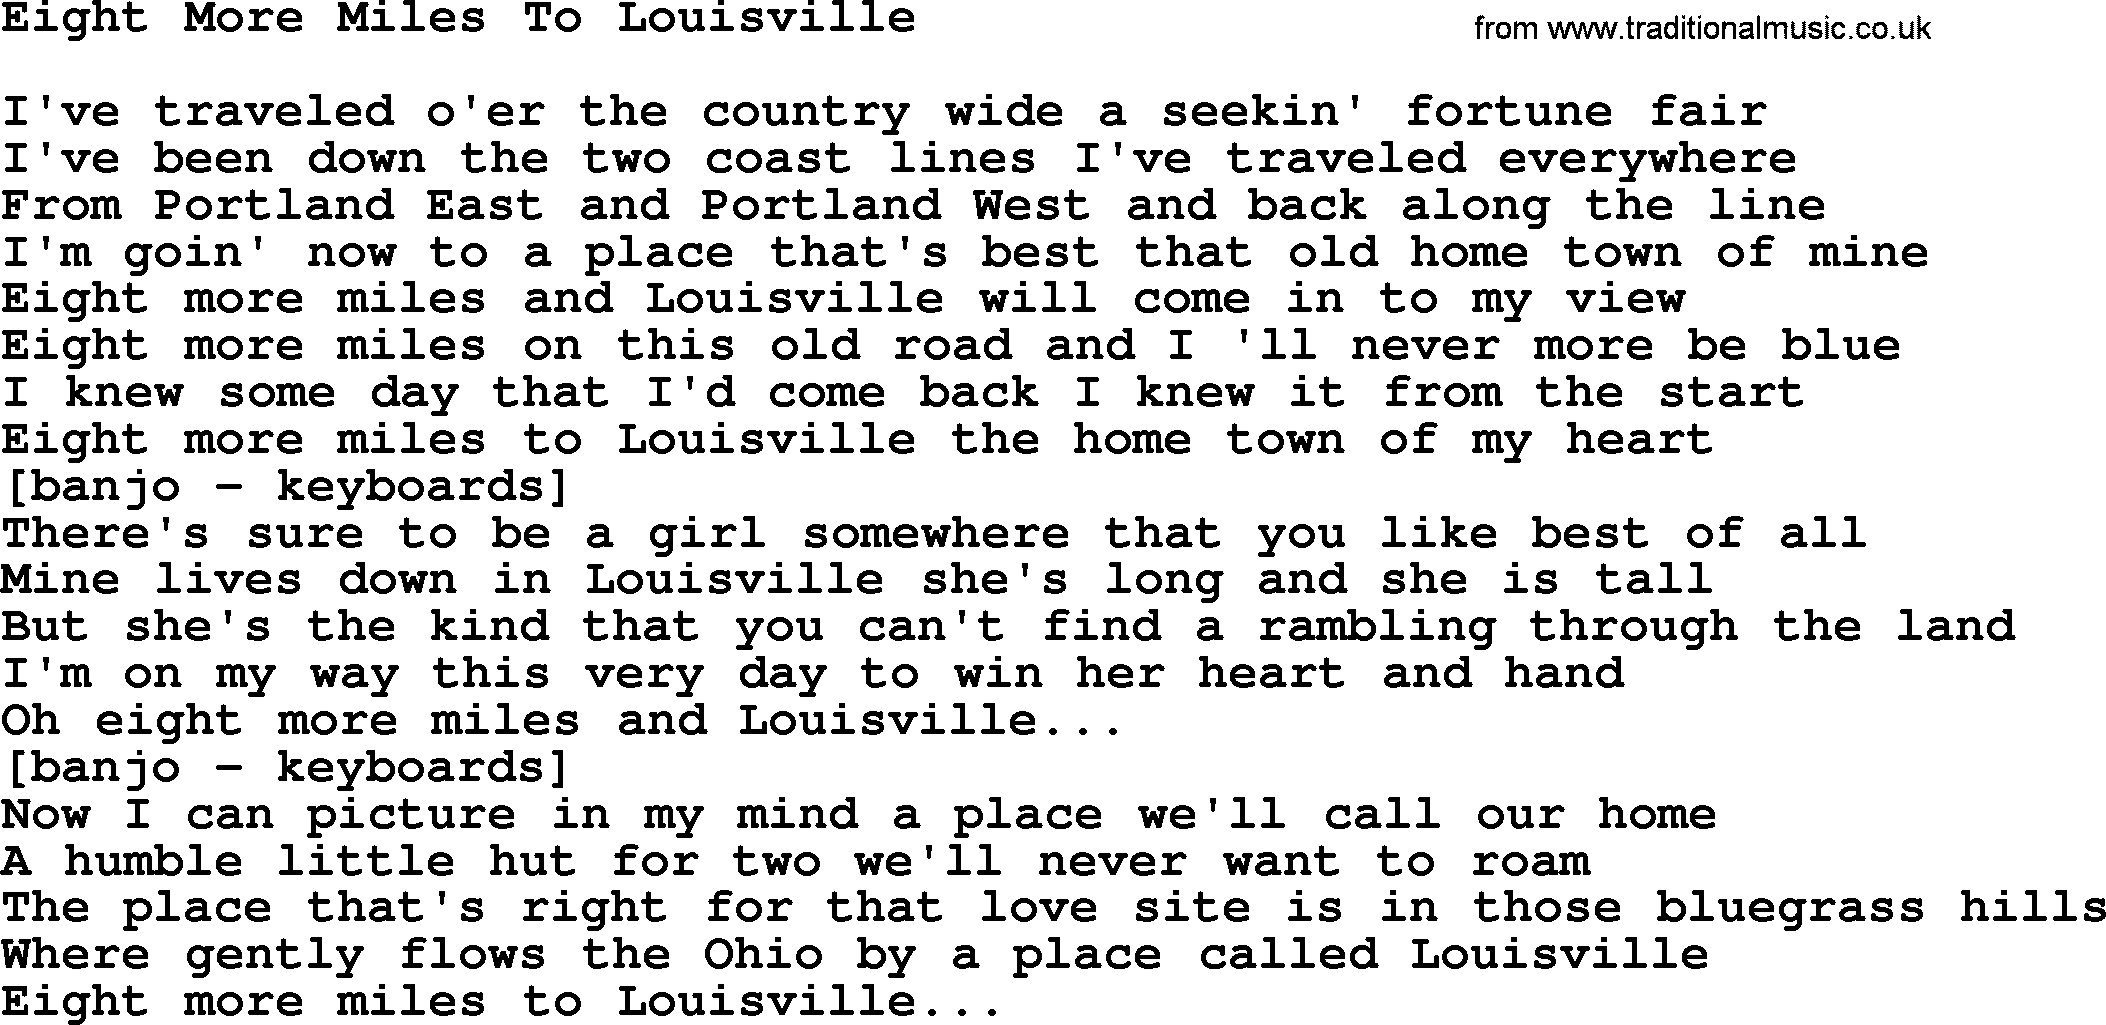 Willie Nelson song: Eight More Miles To Louisville lyrics